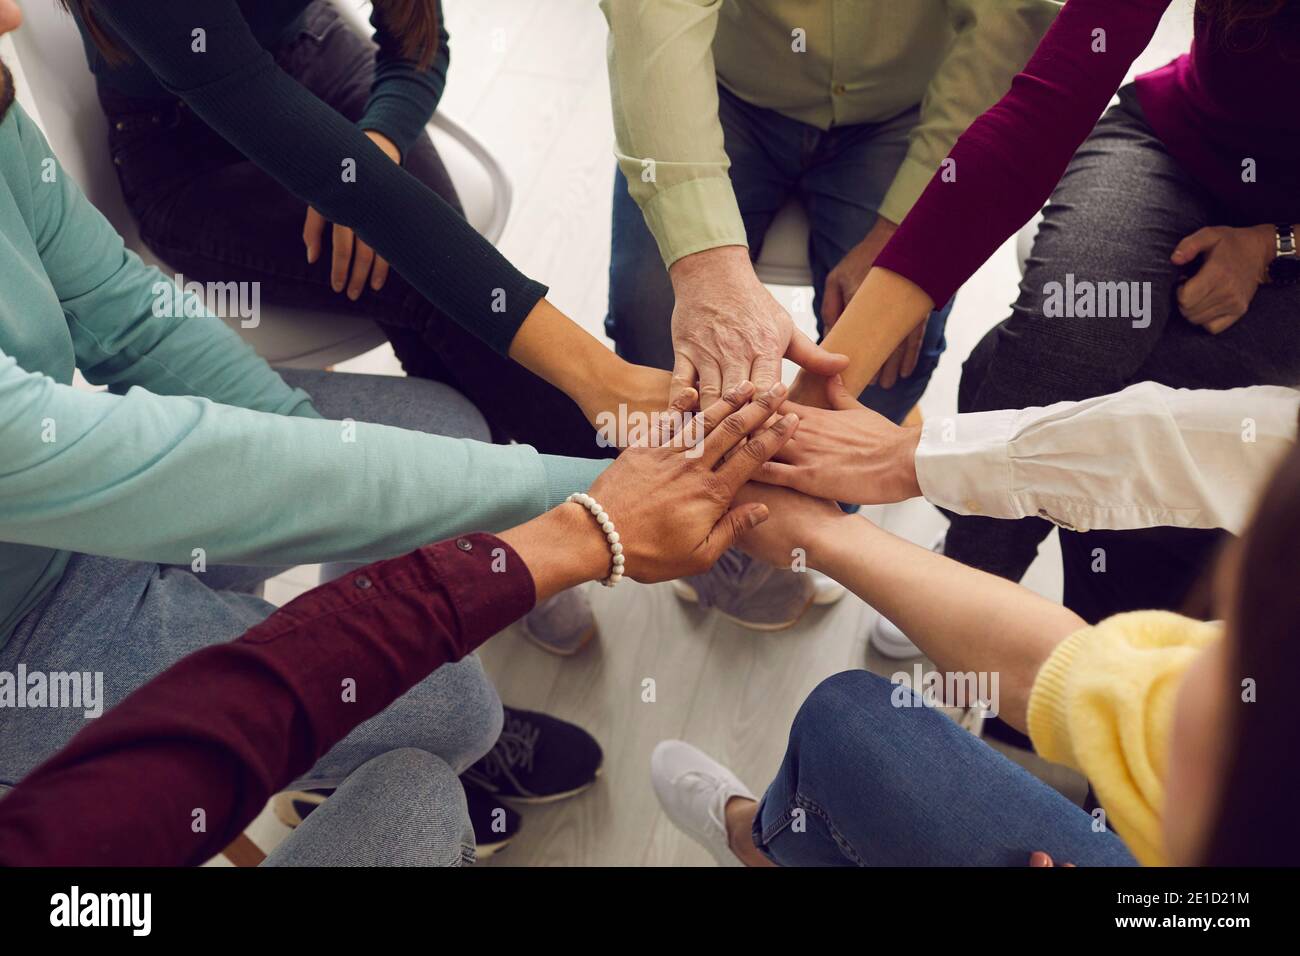 Multiracial people putting hands together in team meeting or group therapy session Stock Photo